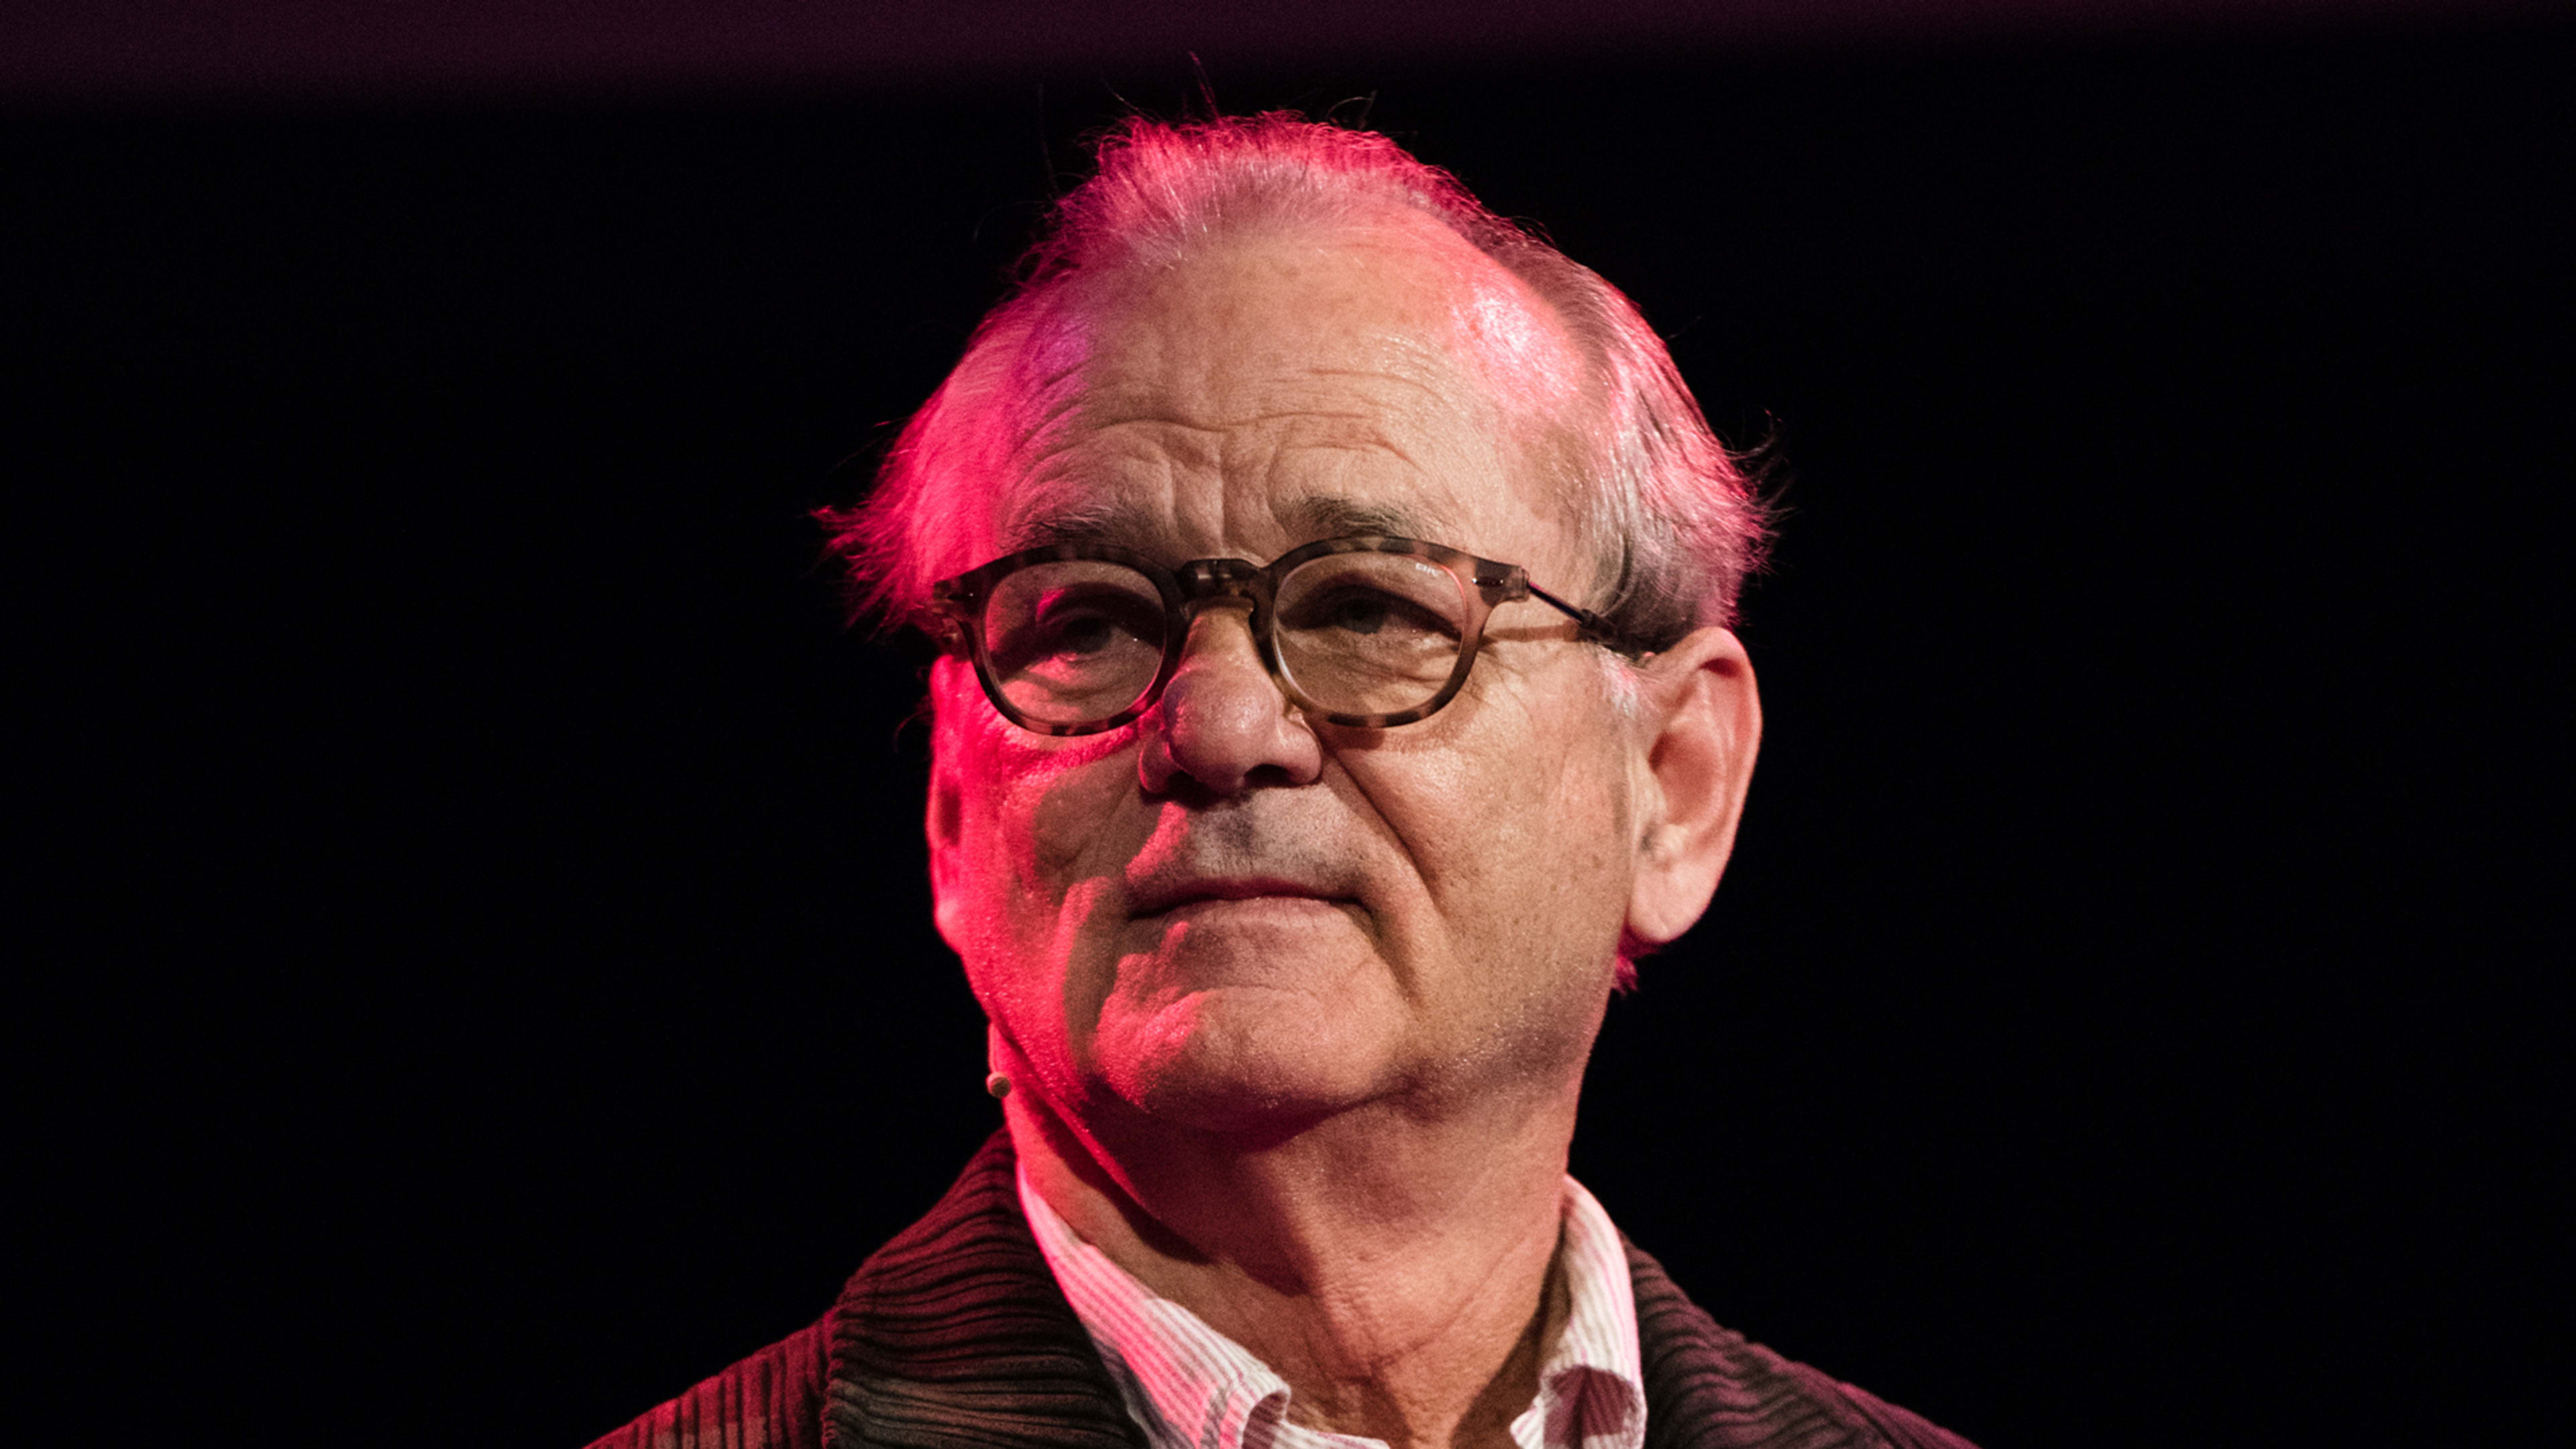 Facebook signs Bill Murray, but that may be a bad choice in the post-Weinstein era